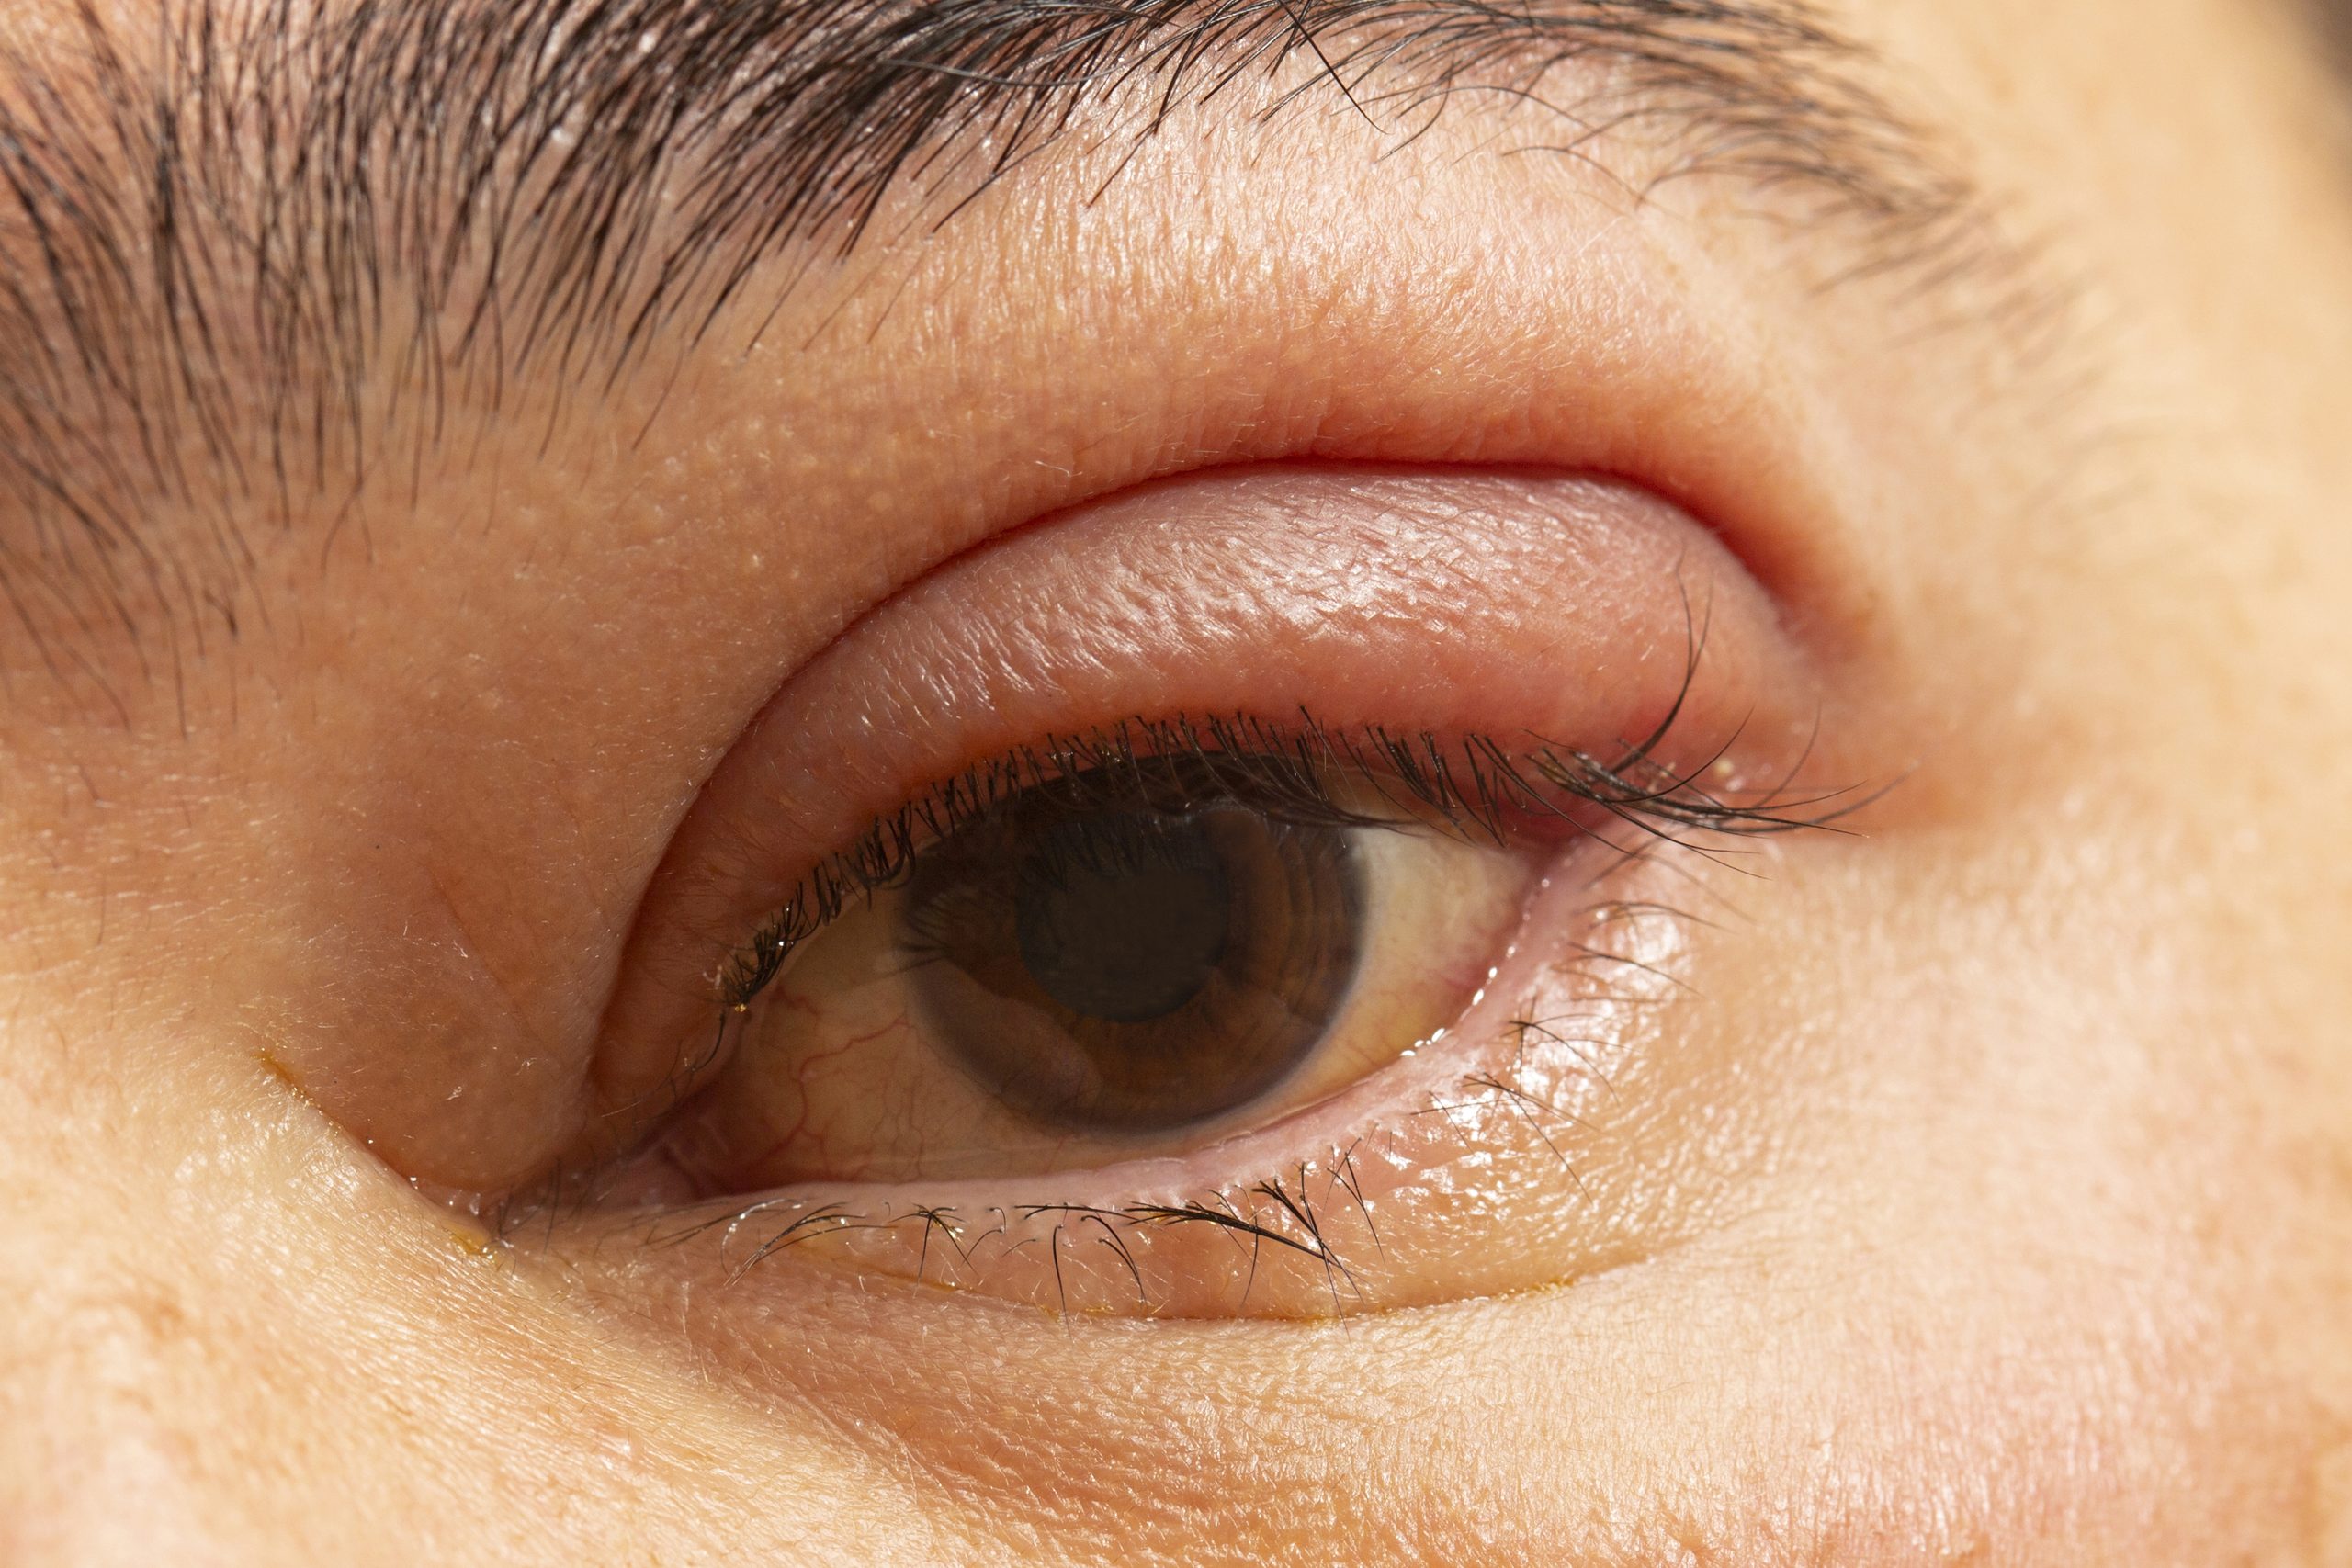 Stye: What You Need to Know About Causes, Symptoms